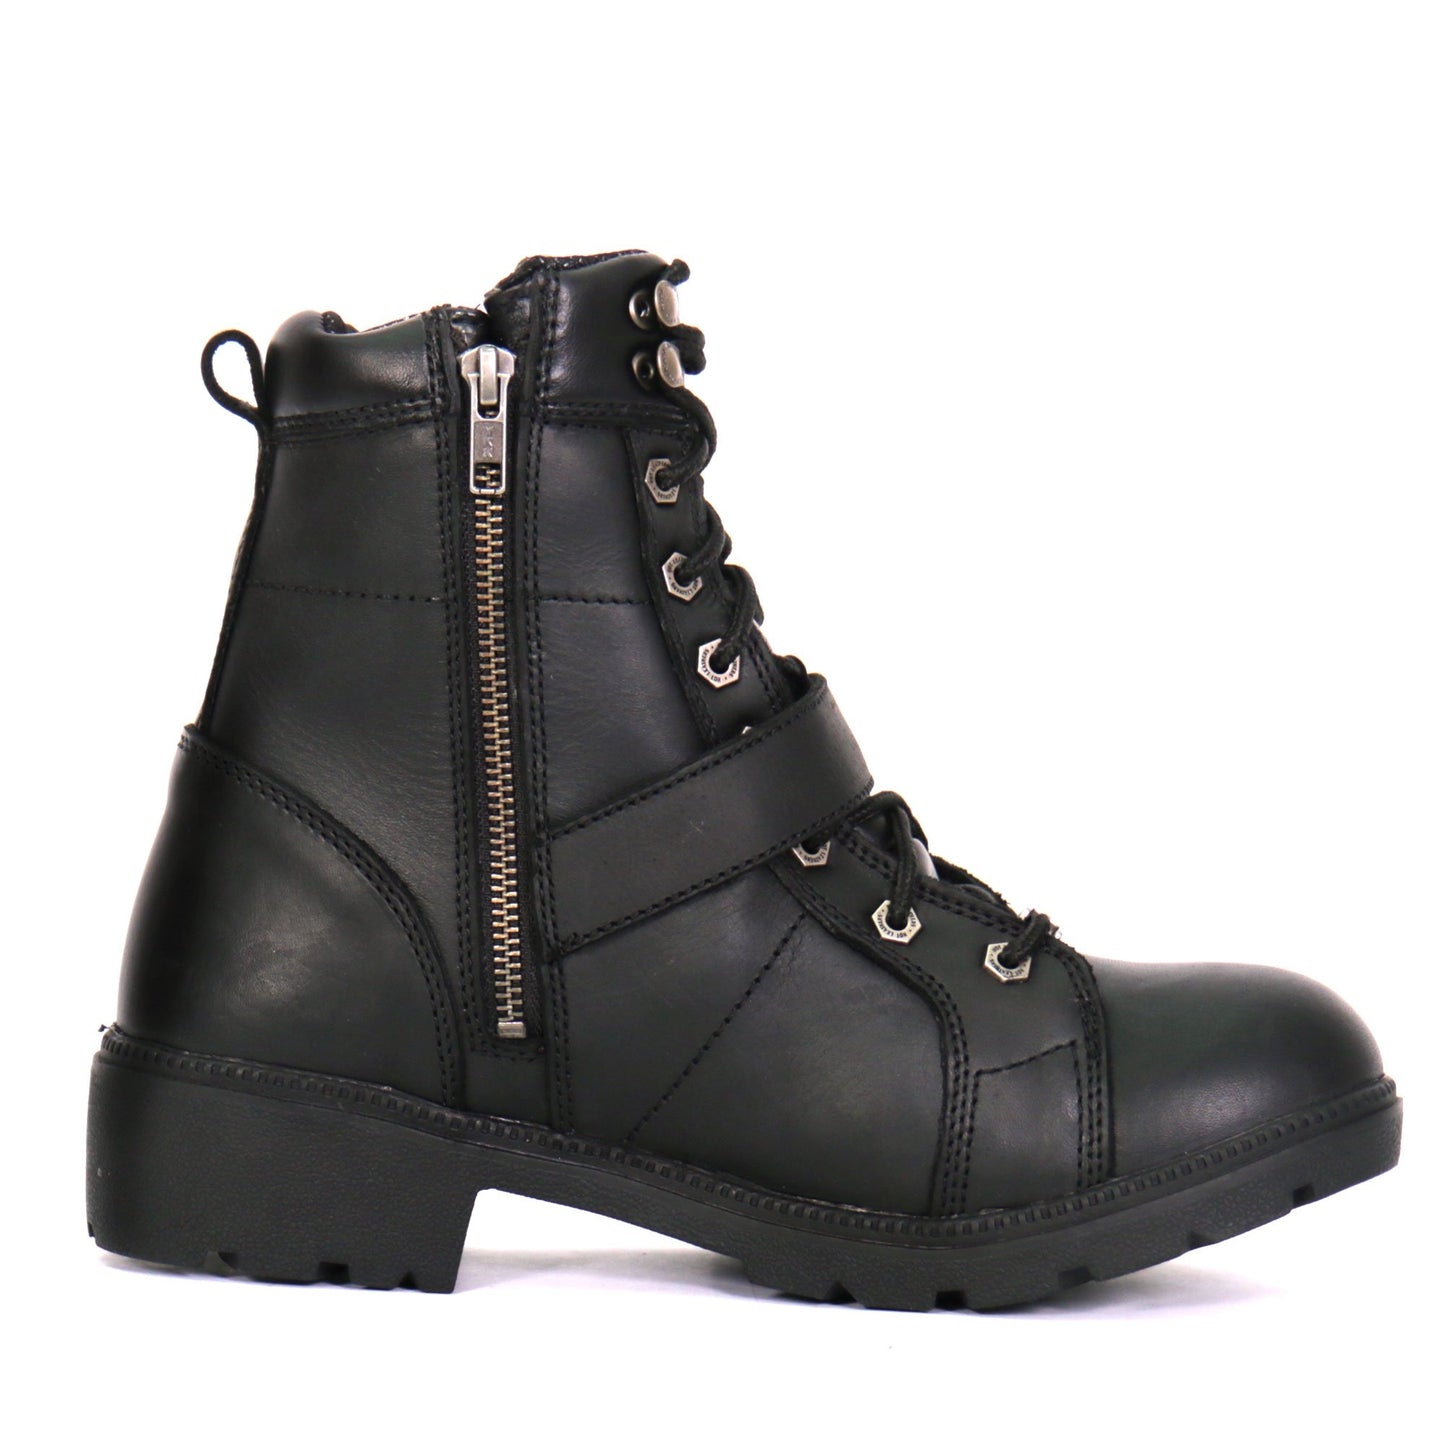 Hot Leathers BTL1004 Ladies 6-inch Black Lace-Up Leather Boots with Buckle Strap